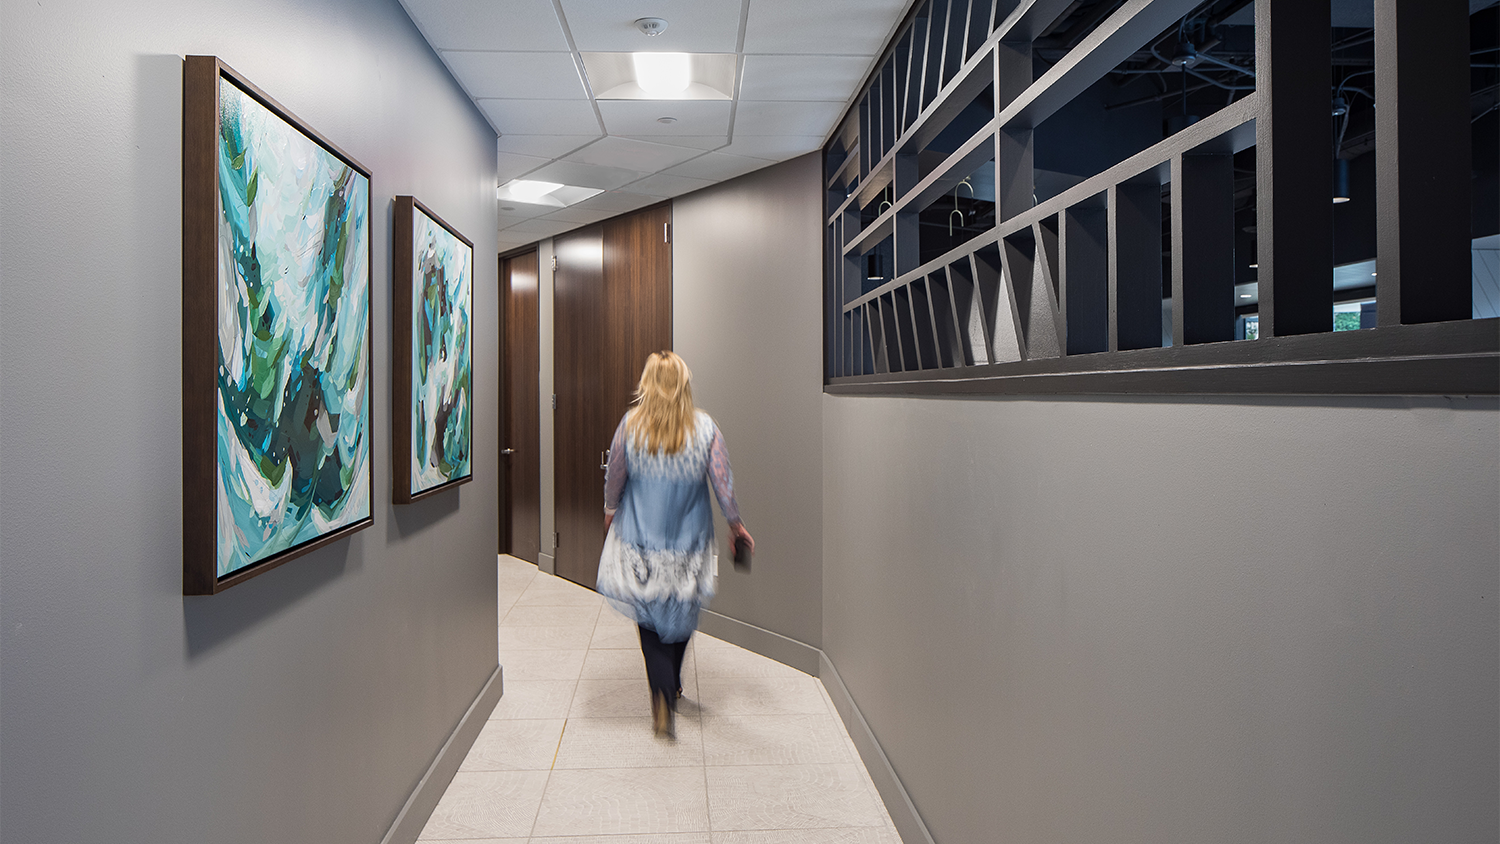 1800 West Loop Hallway with abstract paintings on wall